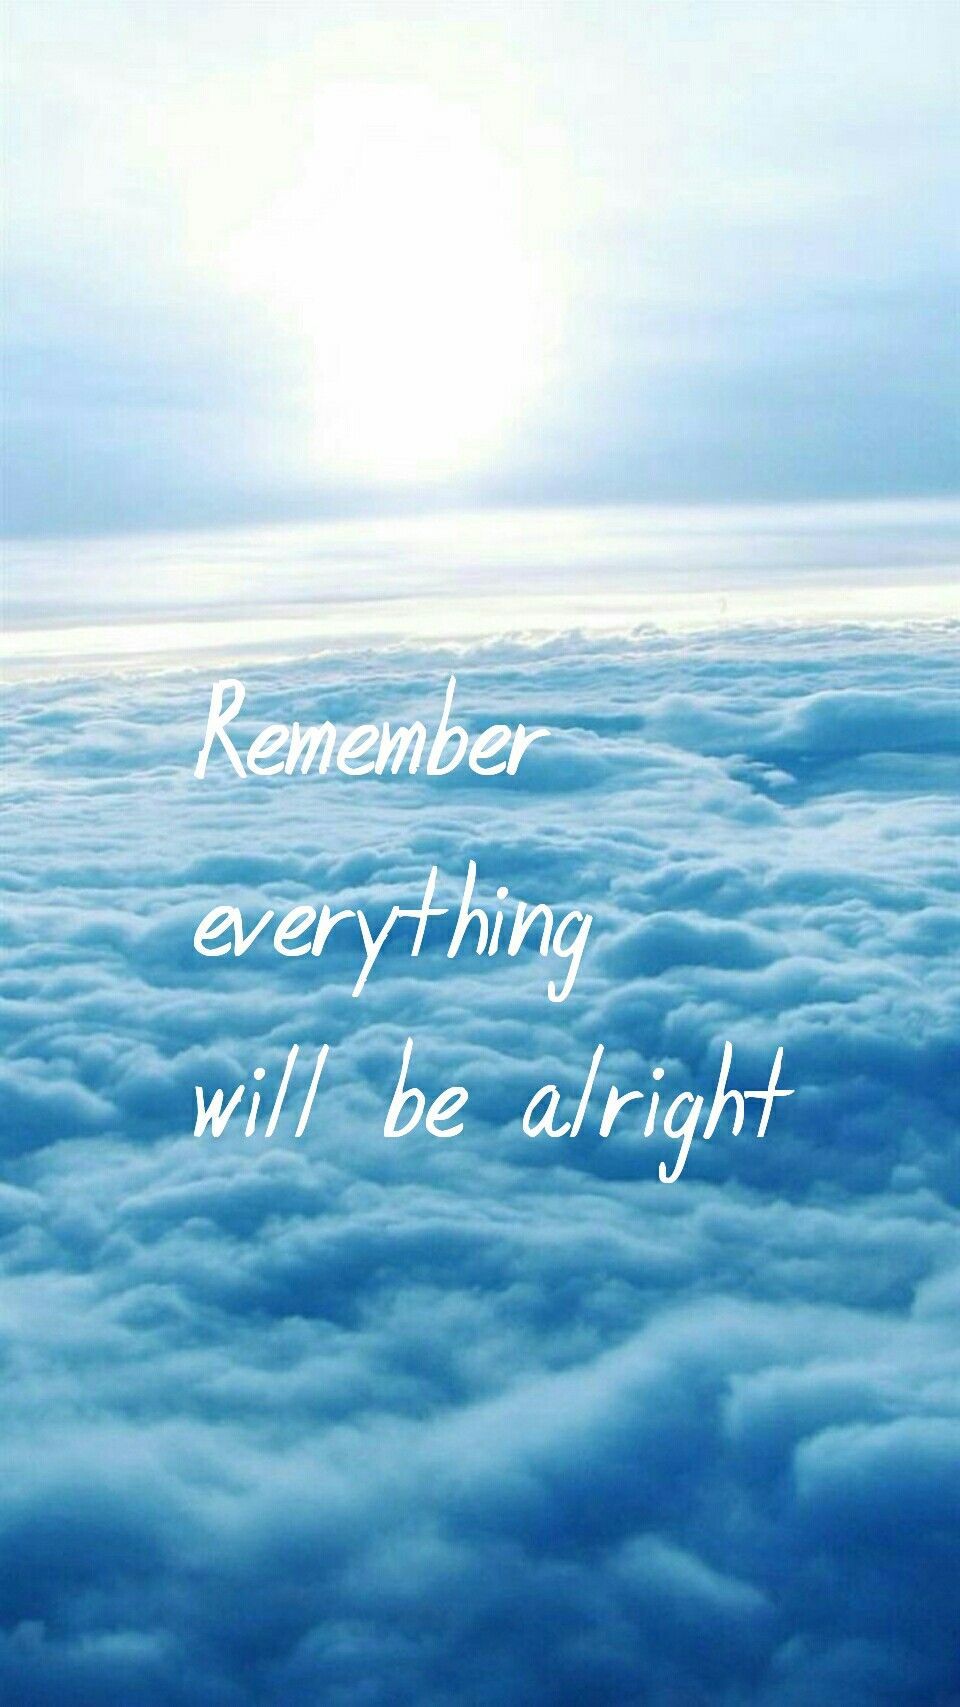 Remember everything will be alright. Wallpaper quotes, Quote background, Inspirational quotes